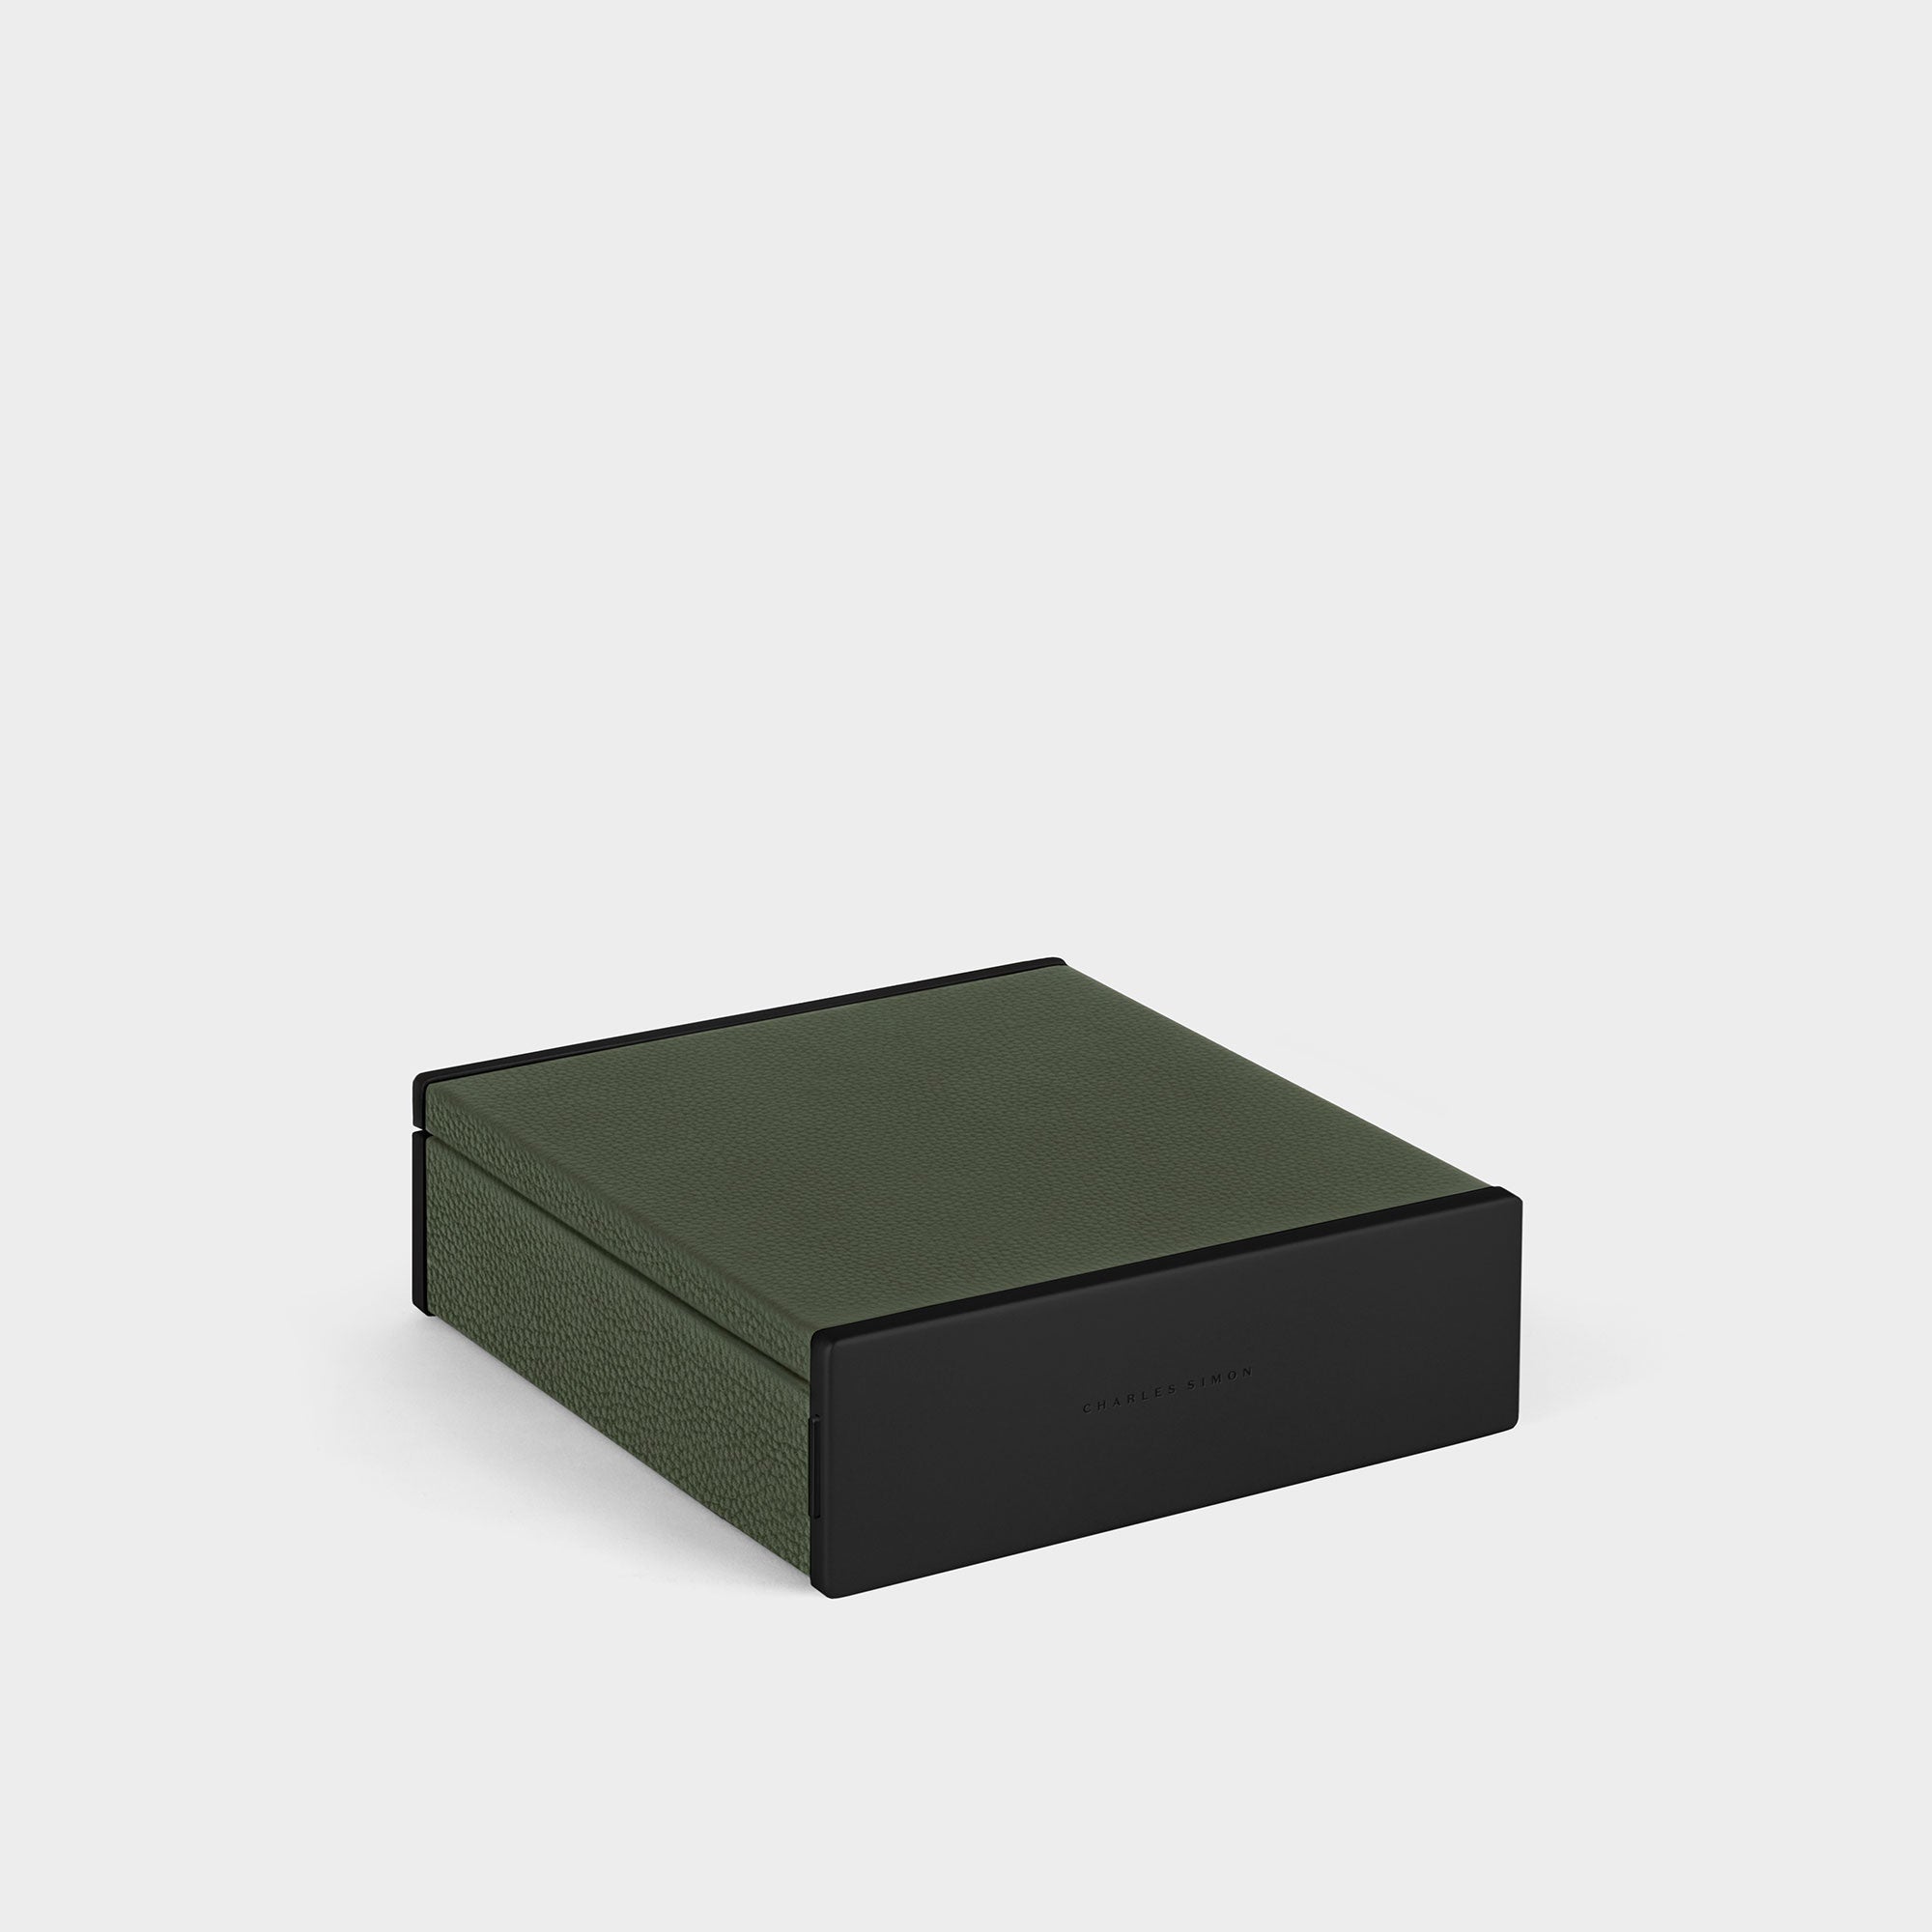 Closed all black luxury watch box by Charles Simon. Handcrafted in Canada from khaki leather and Notte interior.